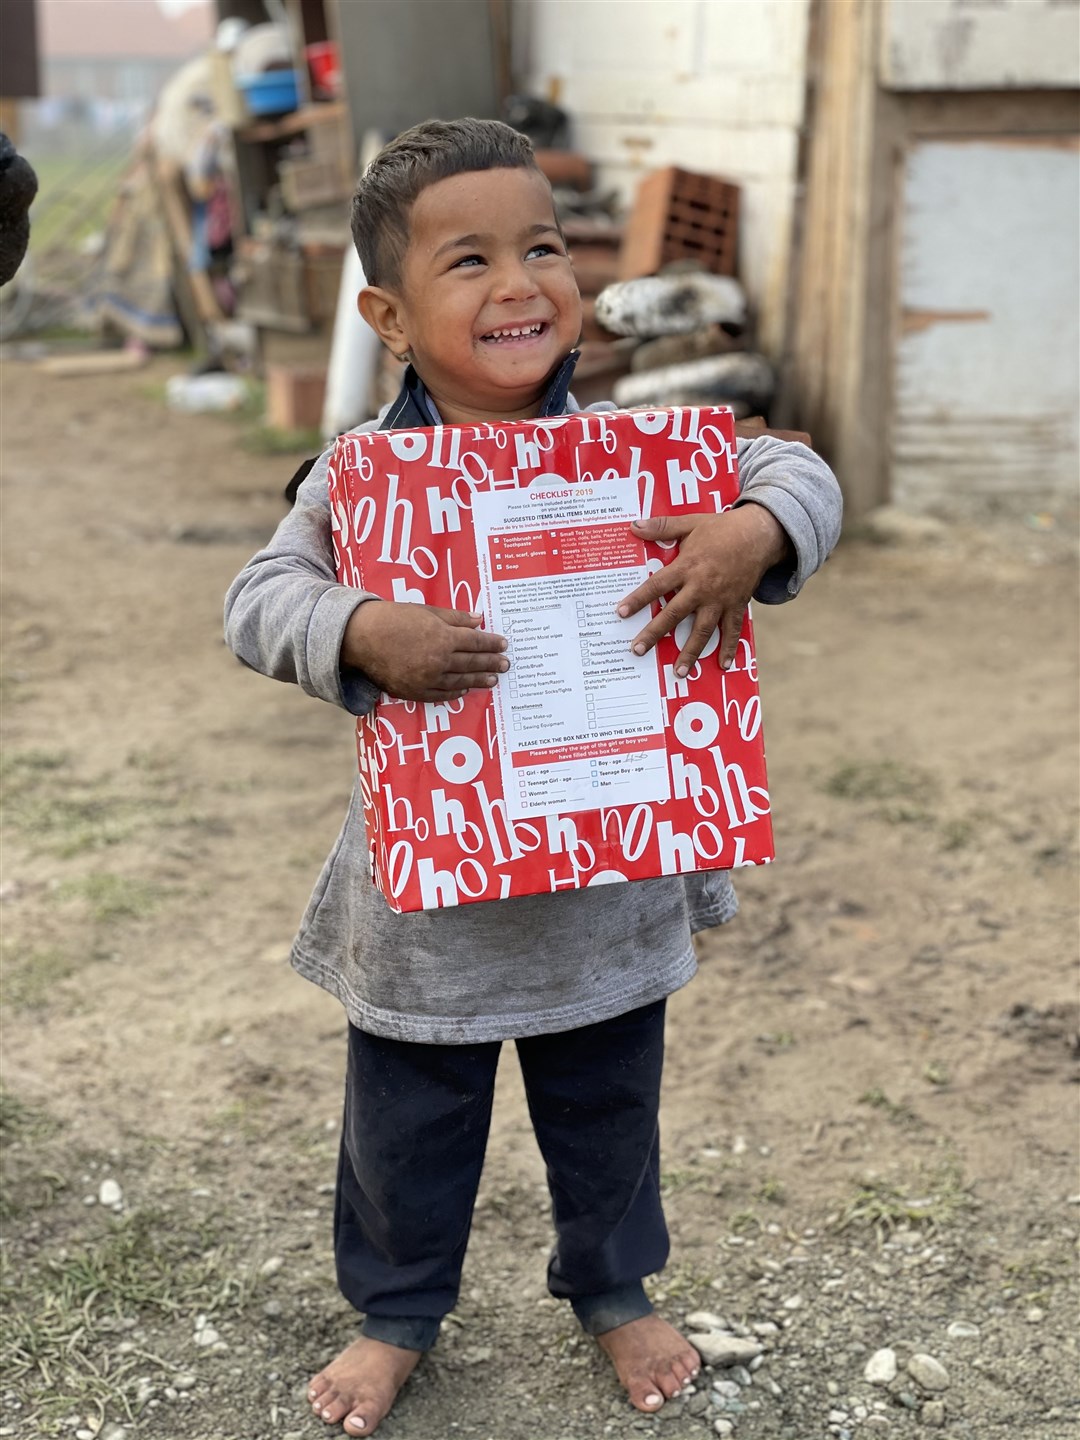 Four-year-old Ismedin, in Kosovo, was delighted with his gift-filled shoebox.